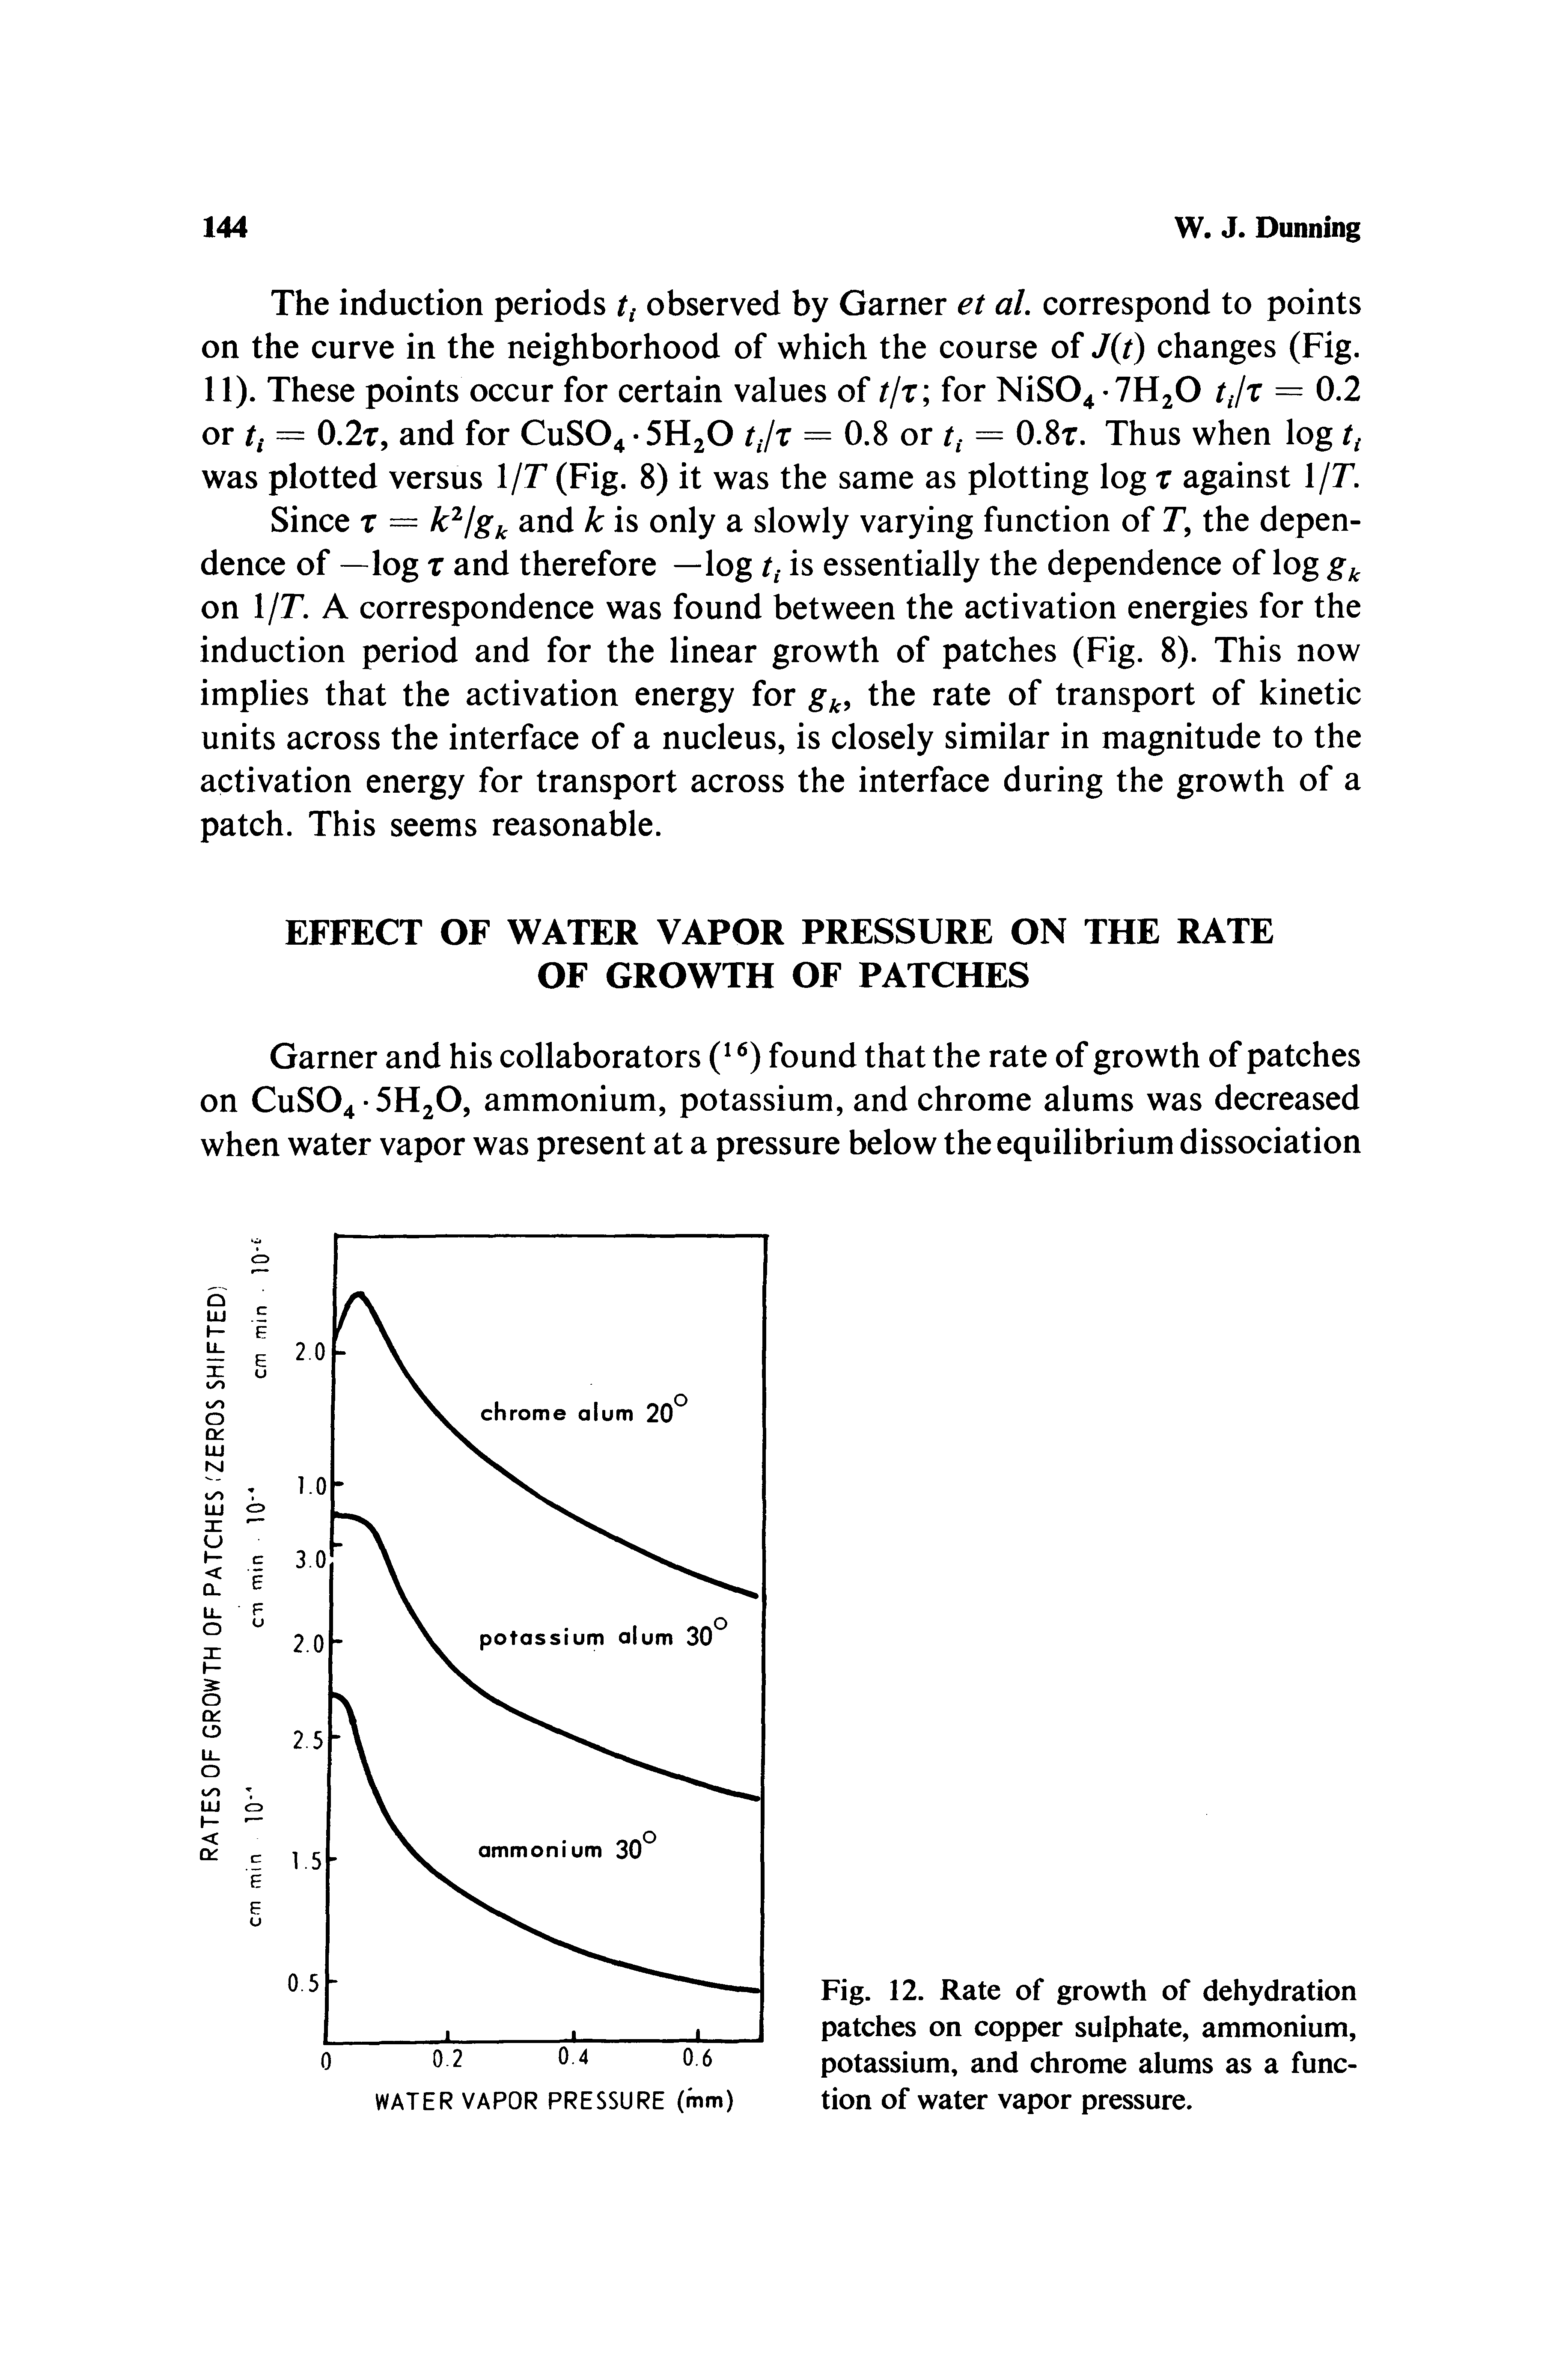 Fig. 12. Rate of growth of dehydration patches on copper sulphate, ammonium, potassium, and chrome alums as a func< tion of water vapor pressure.